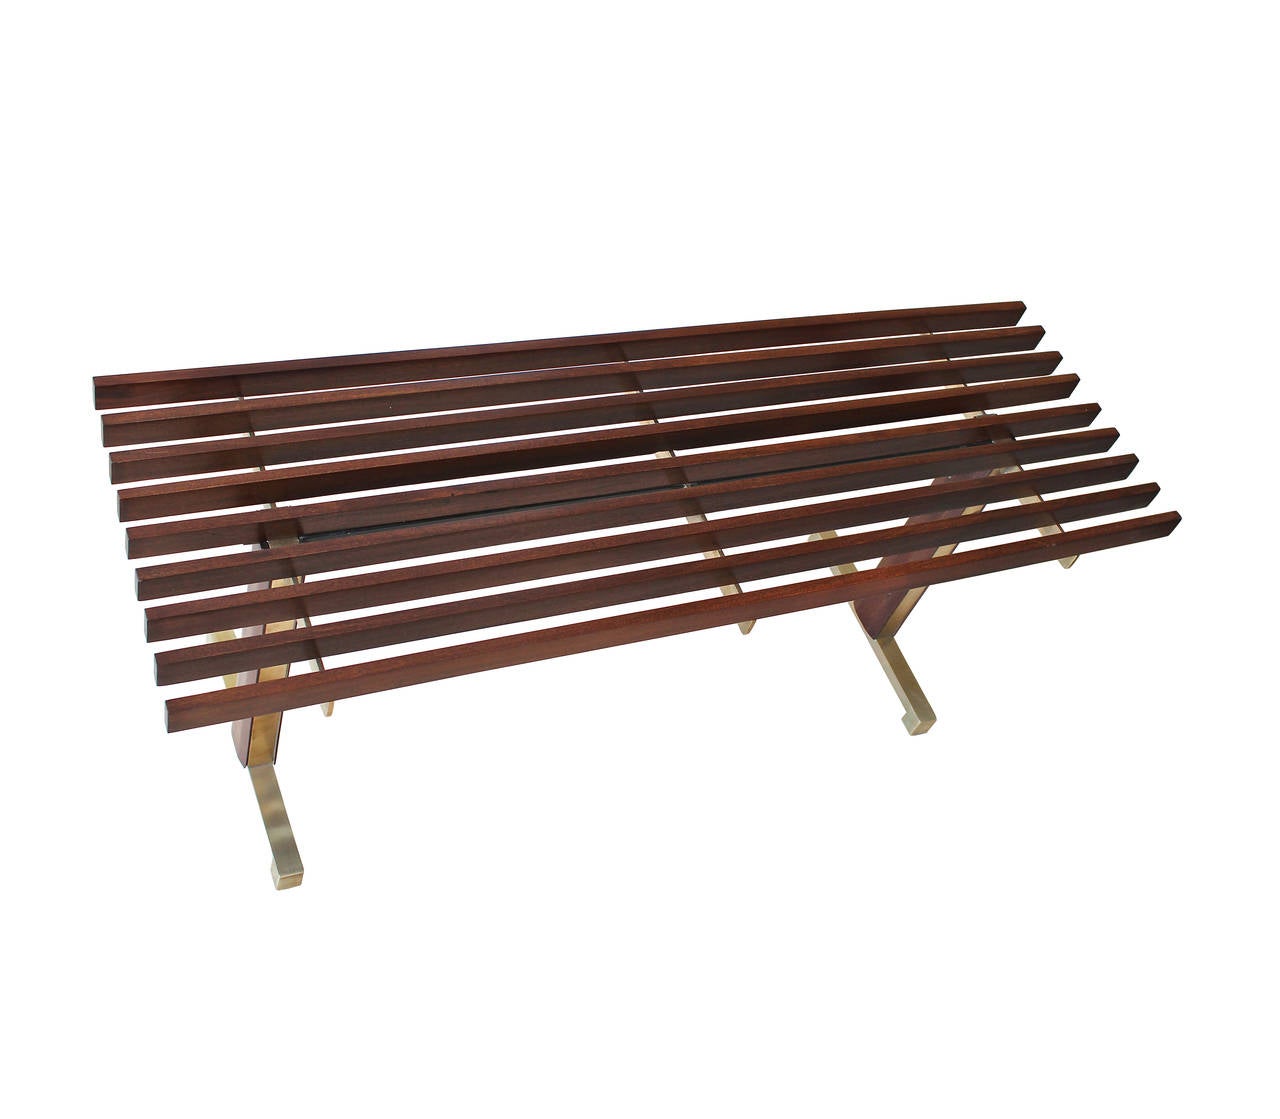 Pair of slatted wooden benches,the legs inset with brass terminating in brass feet.